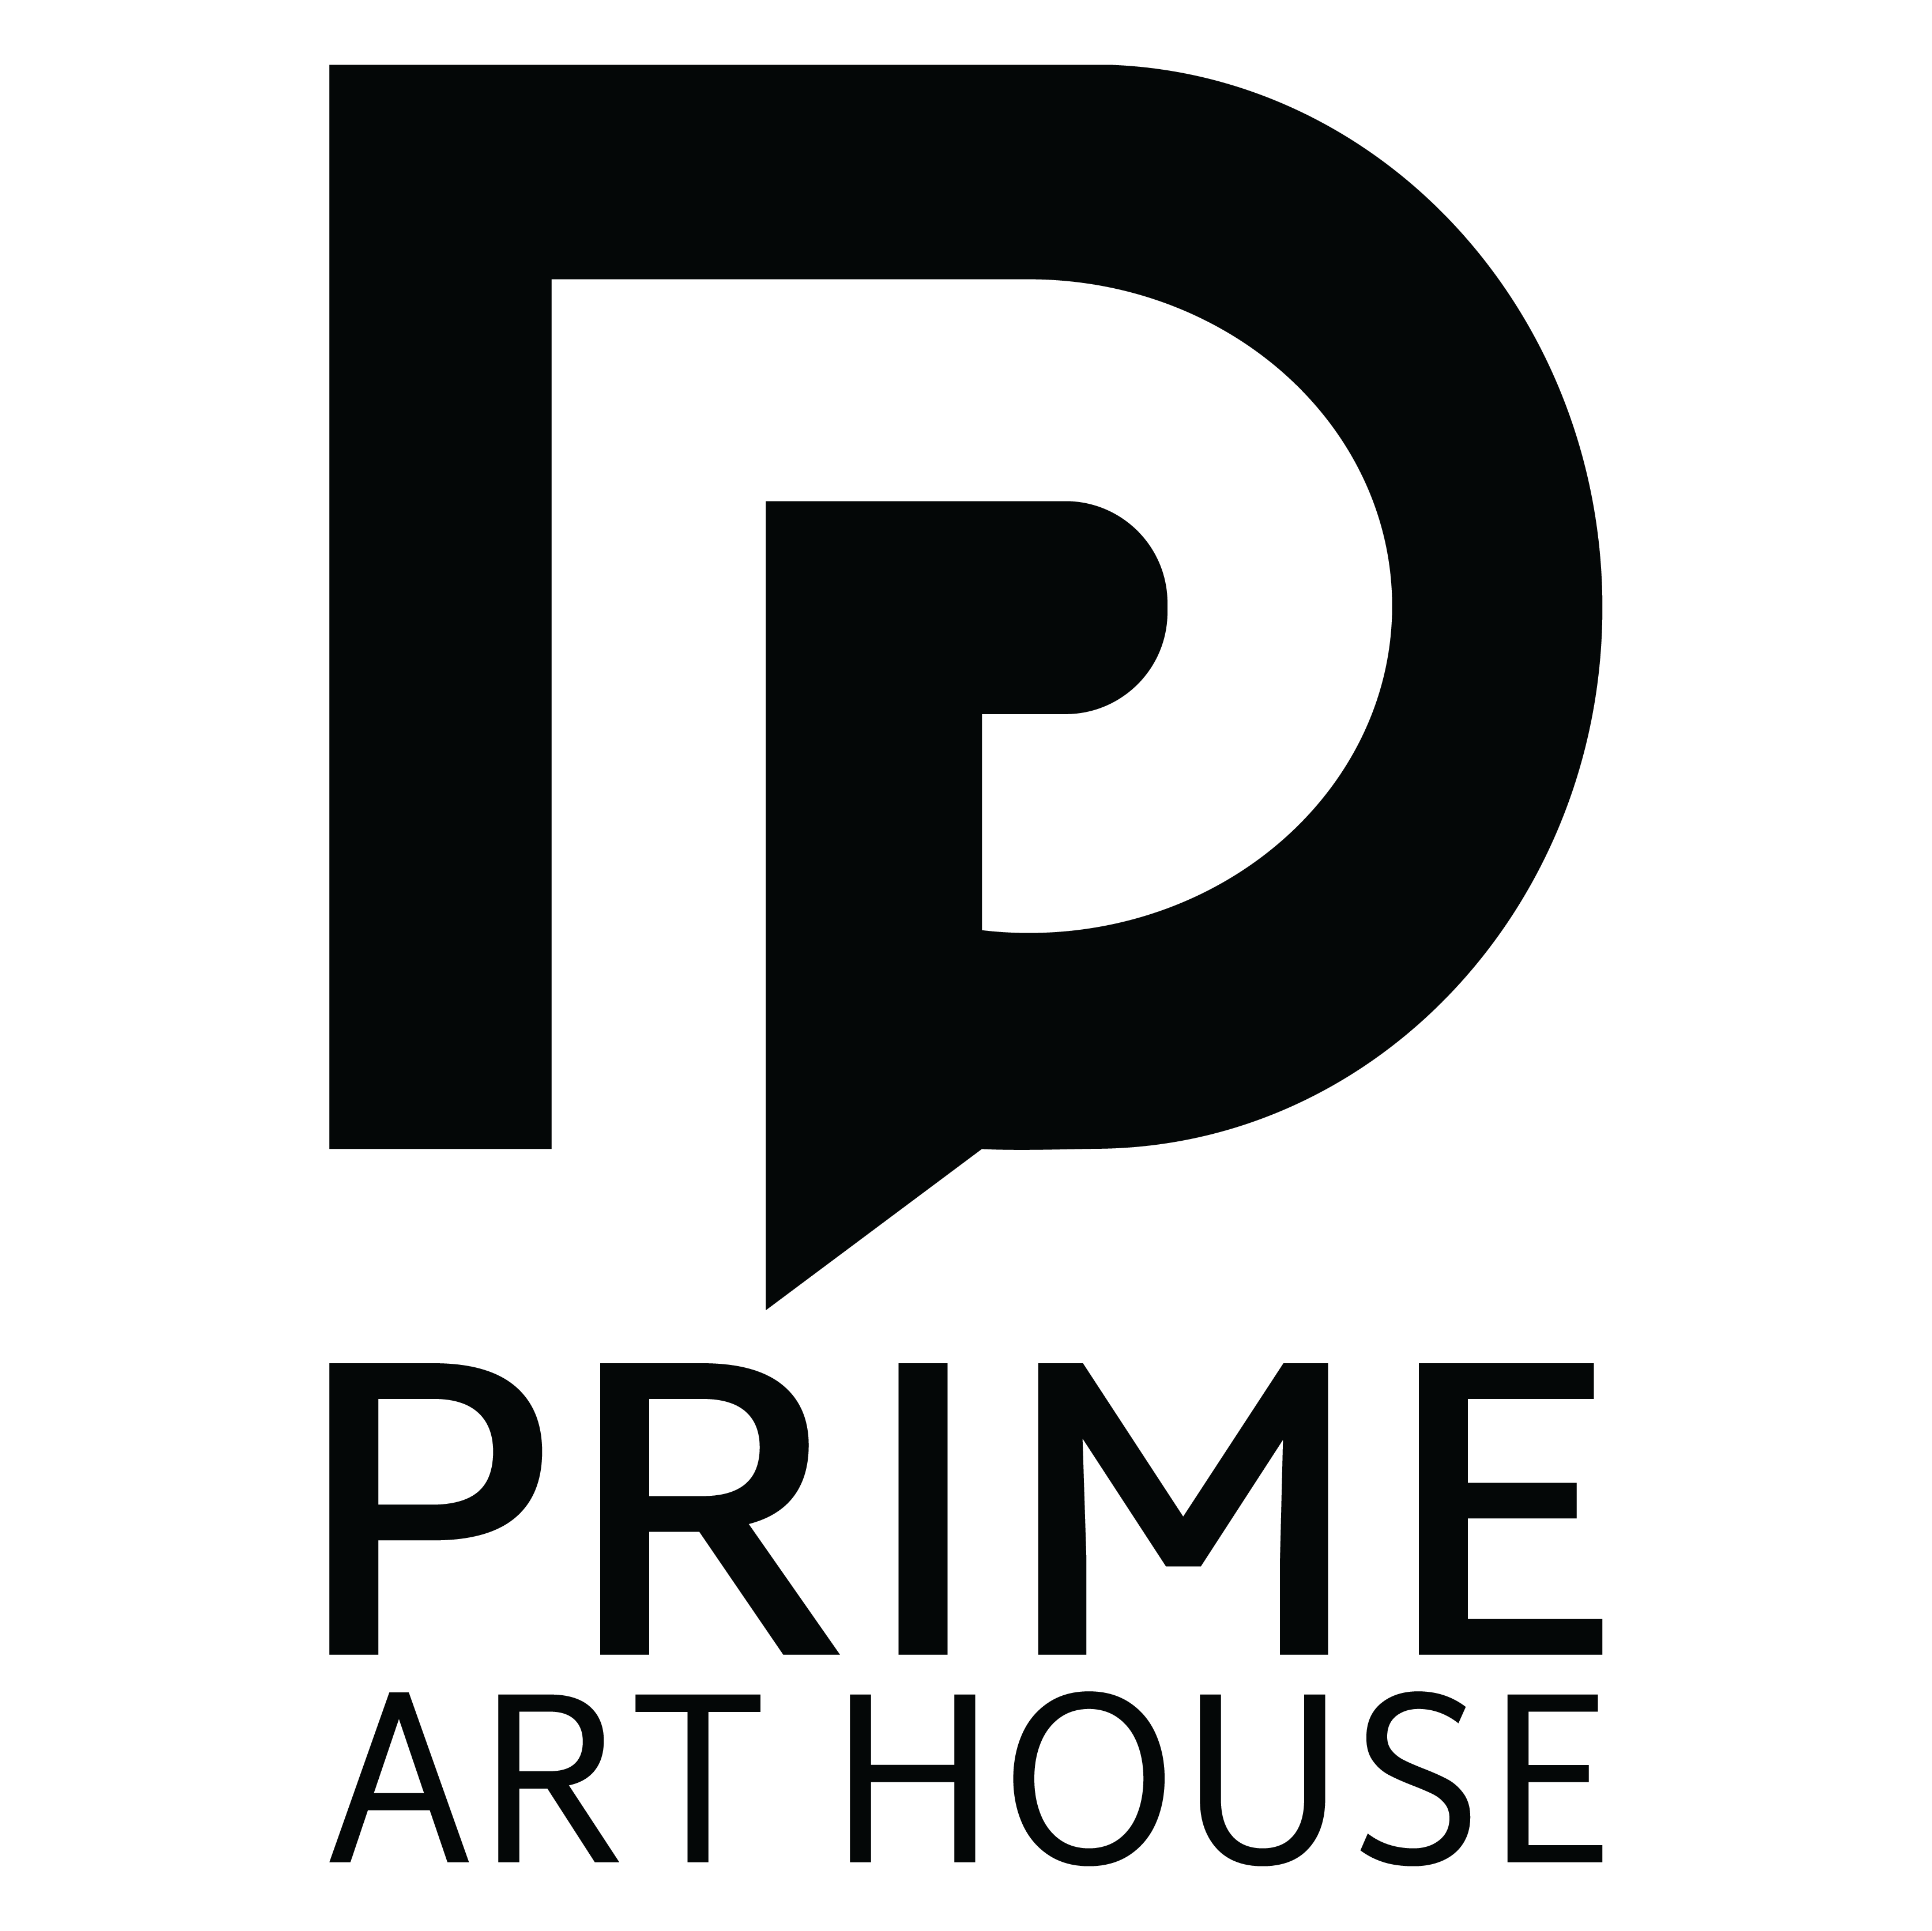 Prime Art House profile on Qualified.One